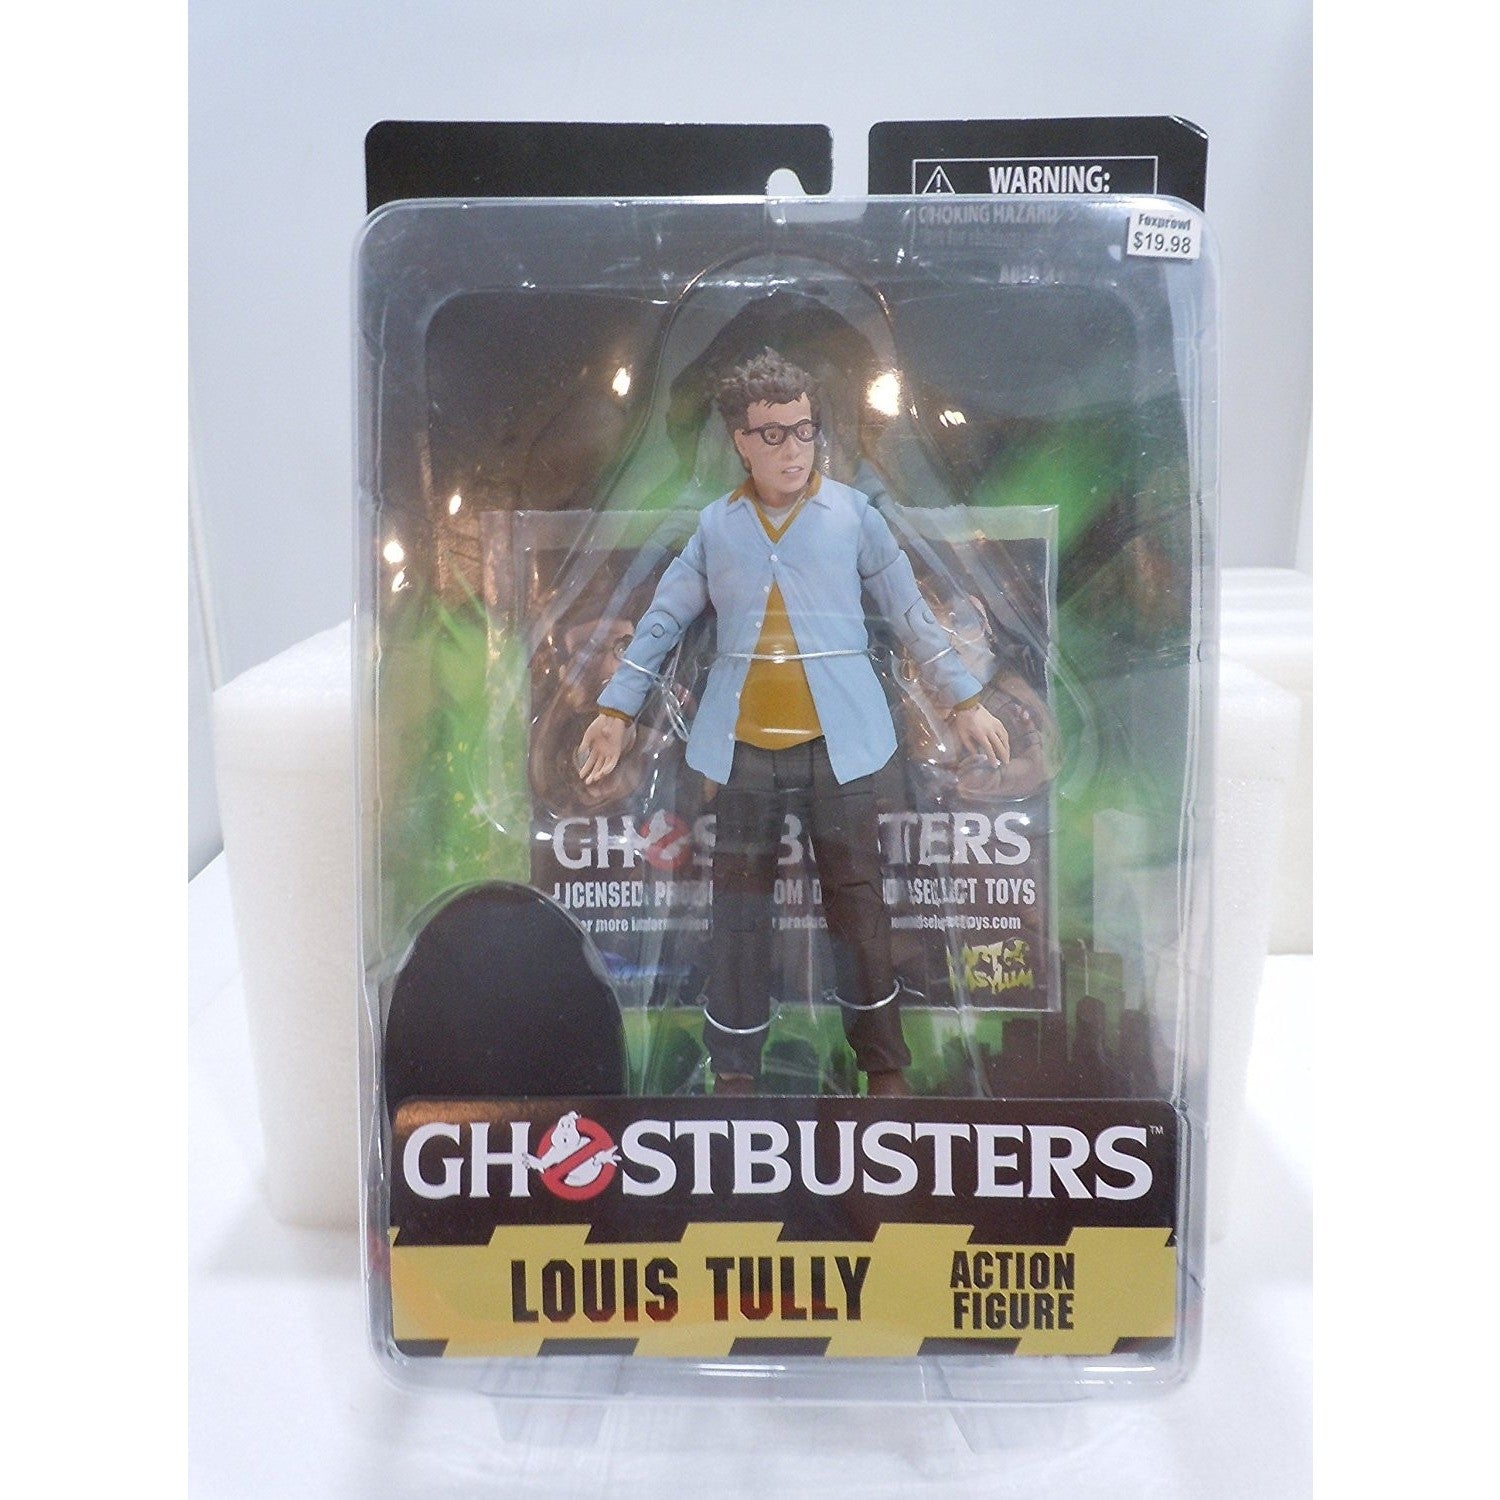 Ghostbusters Fact List: Louis Tully